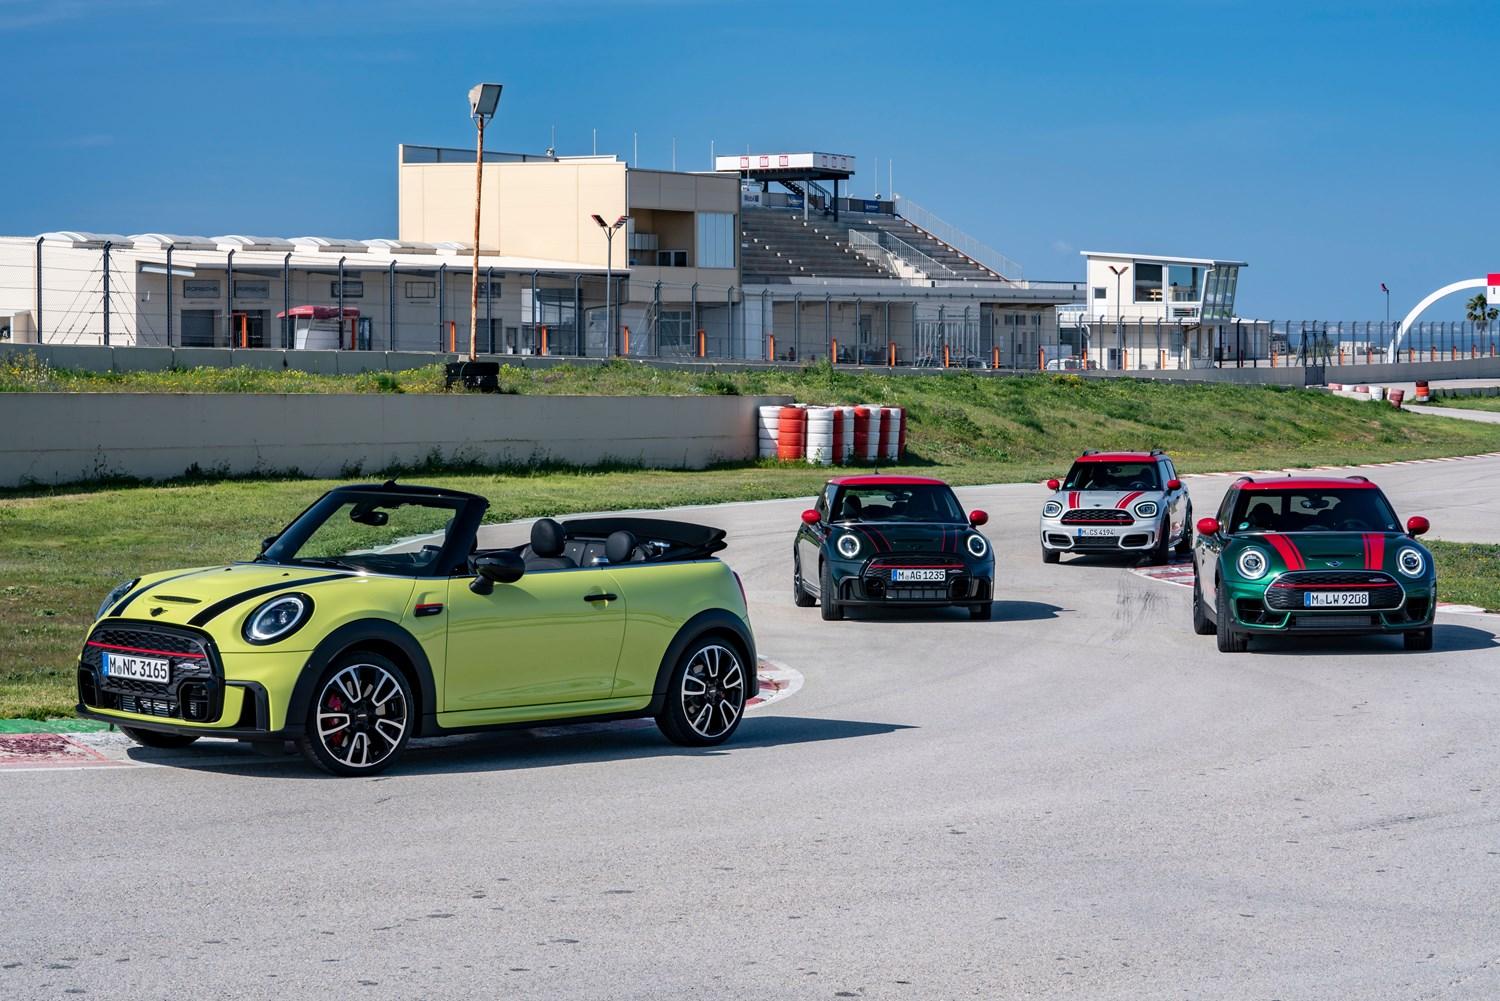 The new MINI John Cooper Works range in different colours, parked around the bend on a racetrack